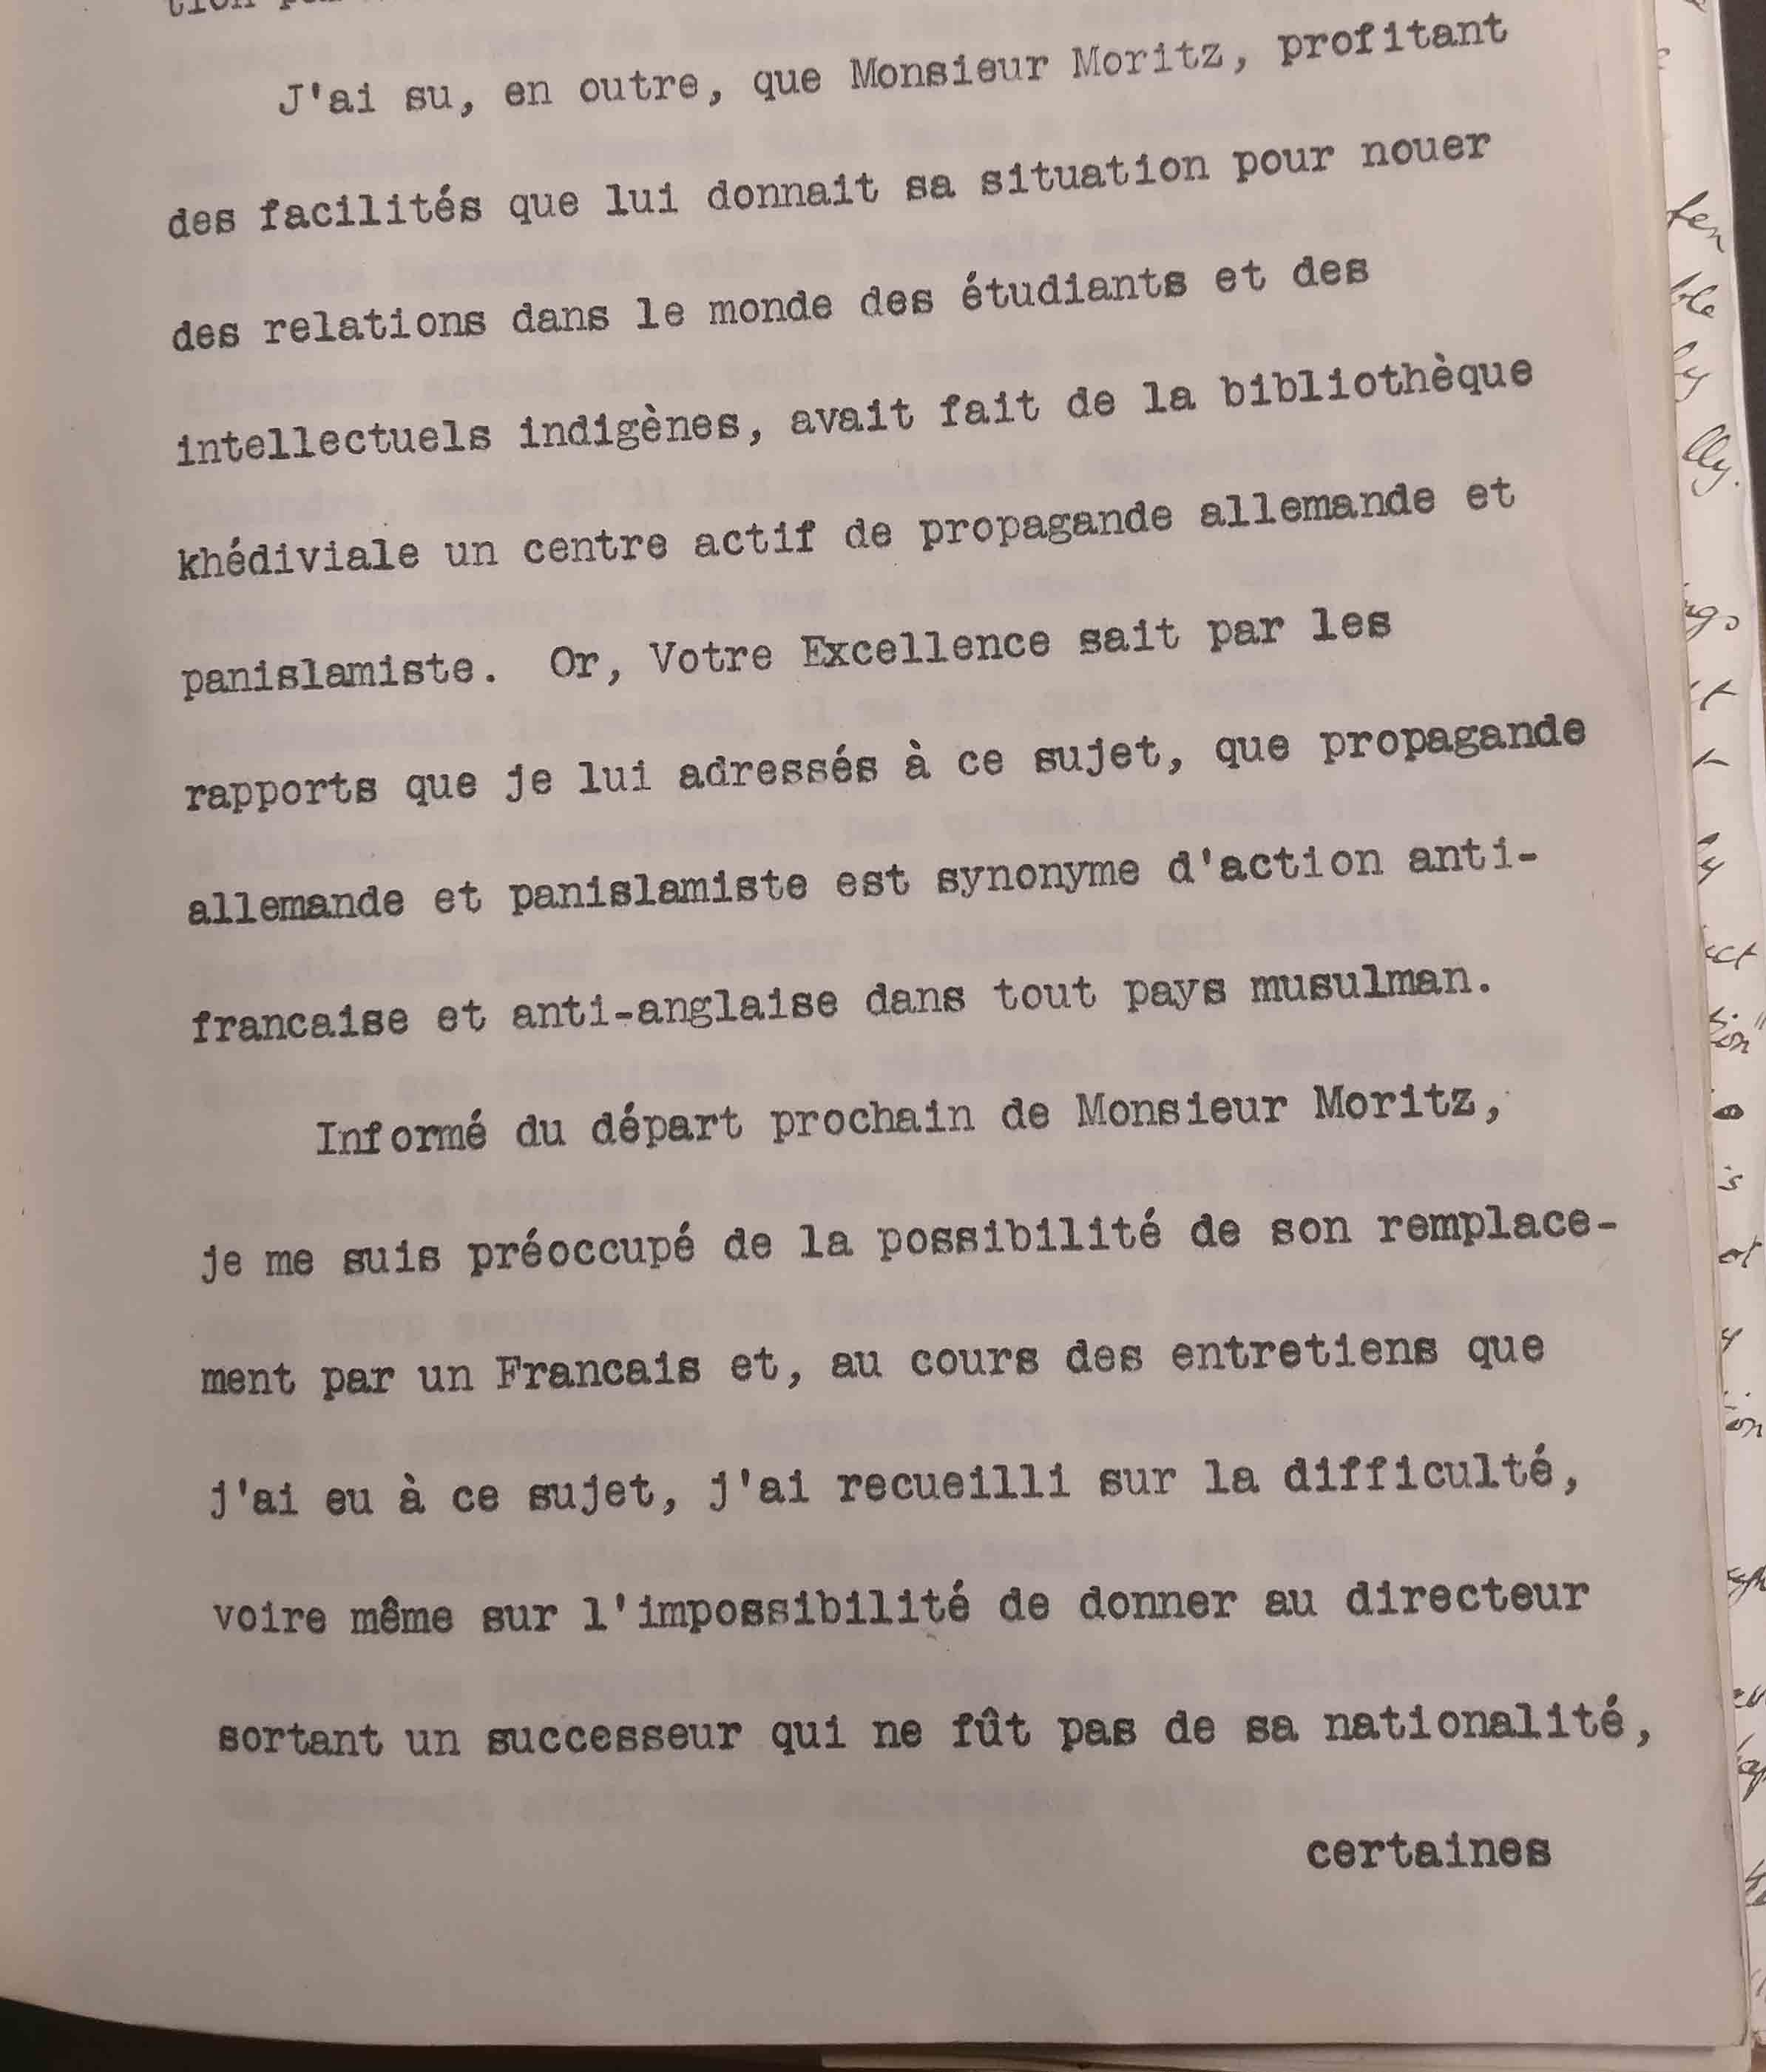 Defrance to Cruppi, 16 June 1911 (catalogue reference: FO 371/1114)